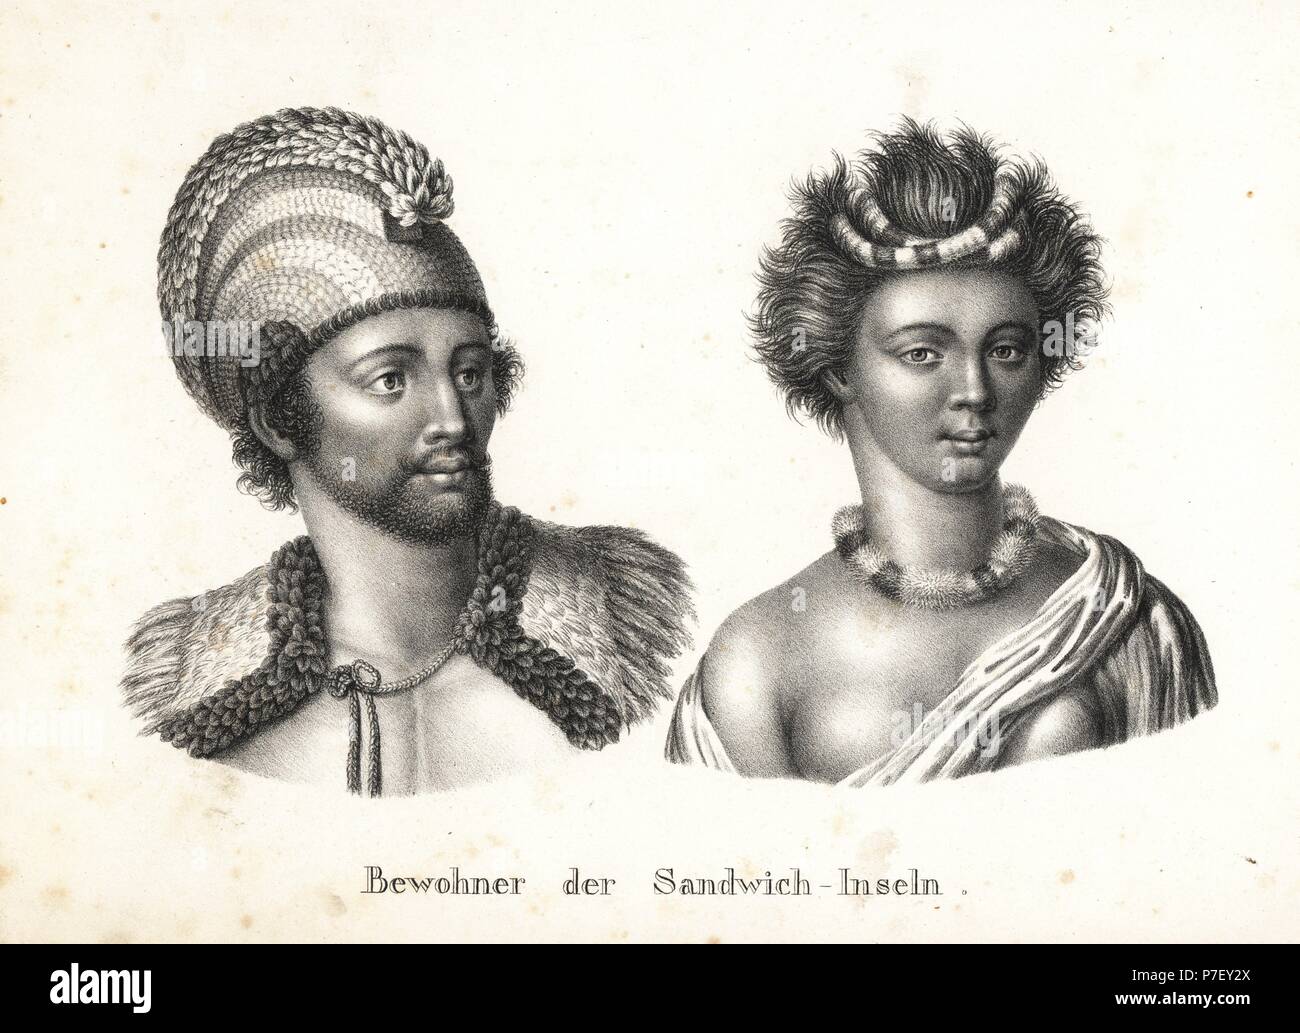 Kalaimanokahoowaha or Kanaina, chief with helmet and cloak made of feathers, and Poeta, his wife, in a feather lei necklace and beads in her hair. (Both after John Webber.) Lithograph by Karl Joseph Brodtmann from Heinrich Rudolf Schinz's Illustrated Natural History of Men and Animals, 1836. Stock Photo